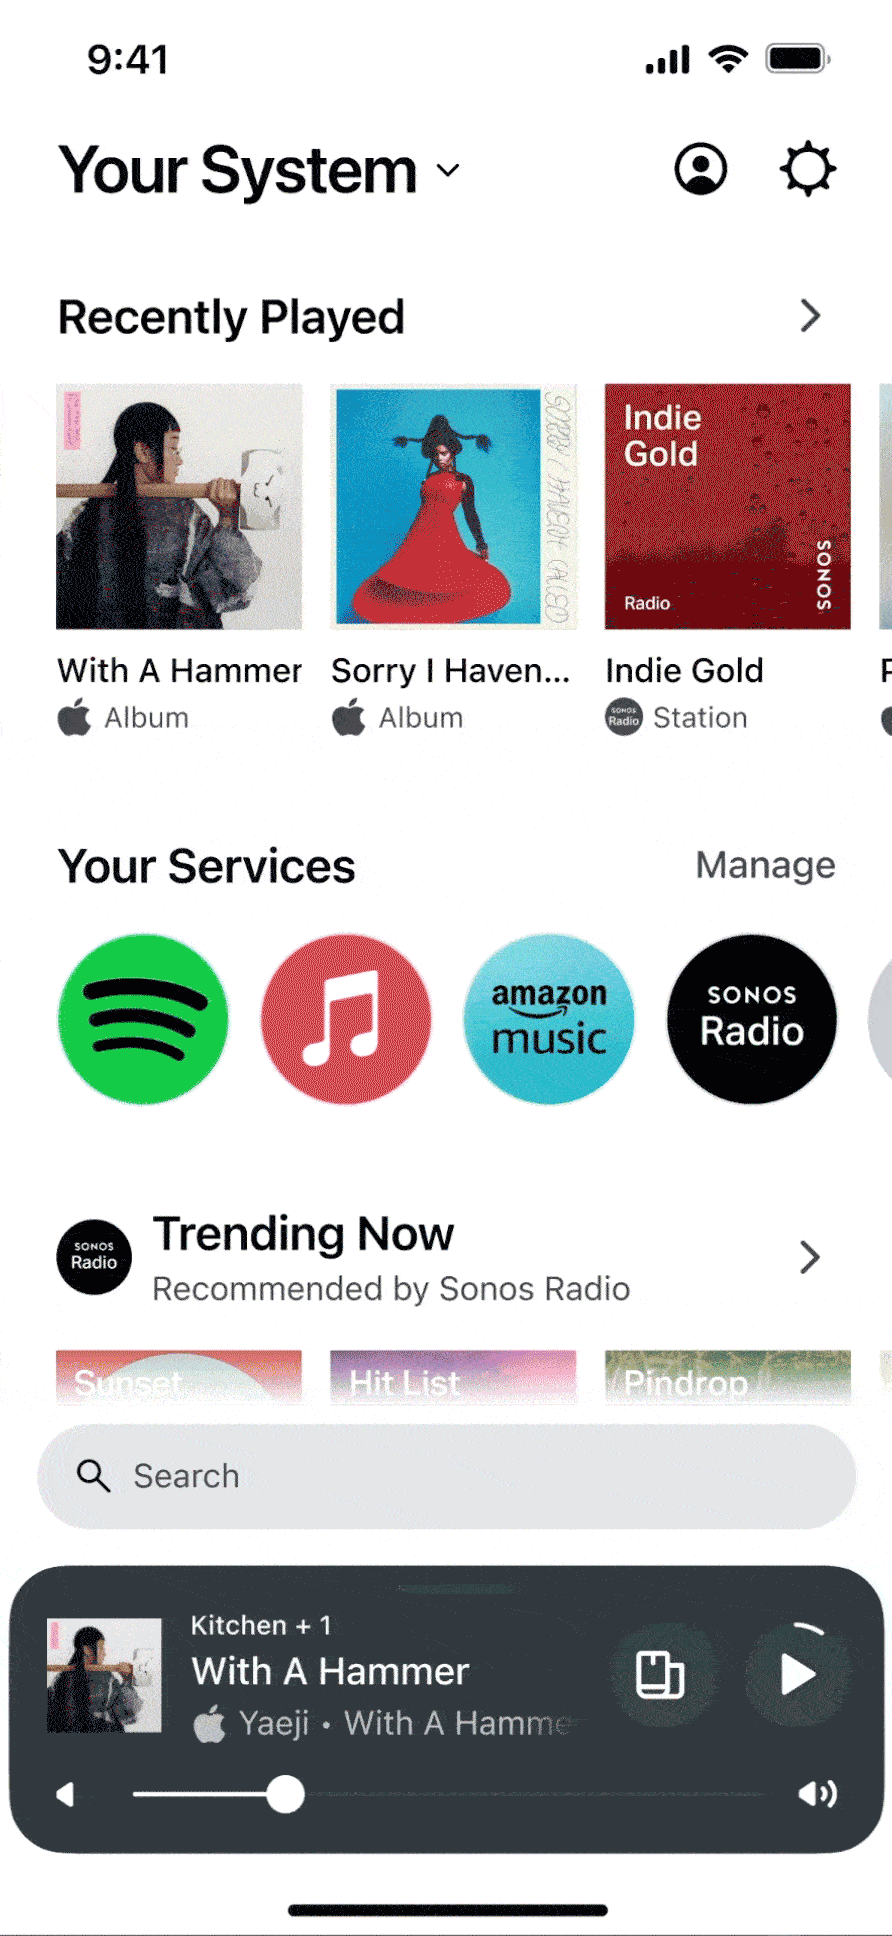 Animated example of navigating the search functionality of the Sonos app